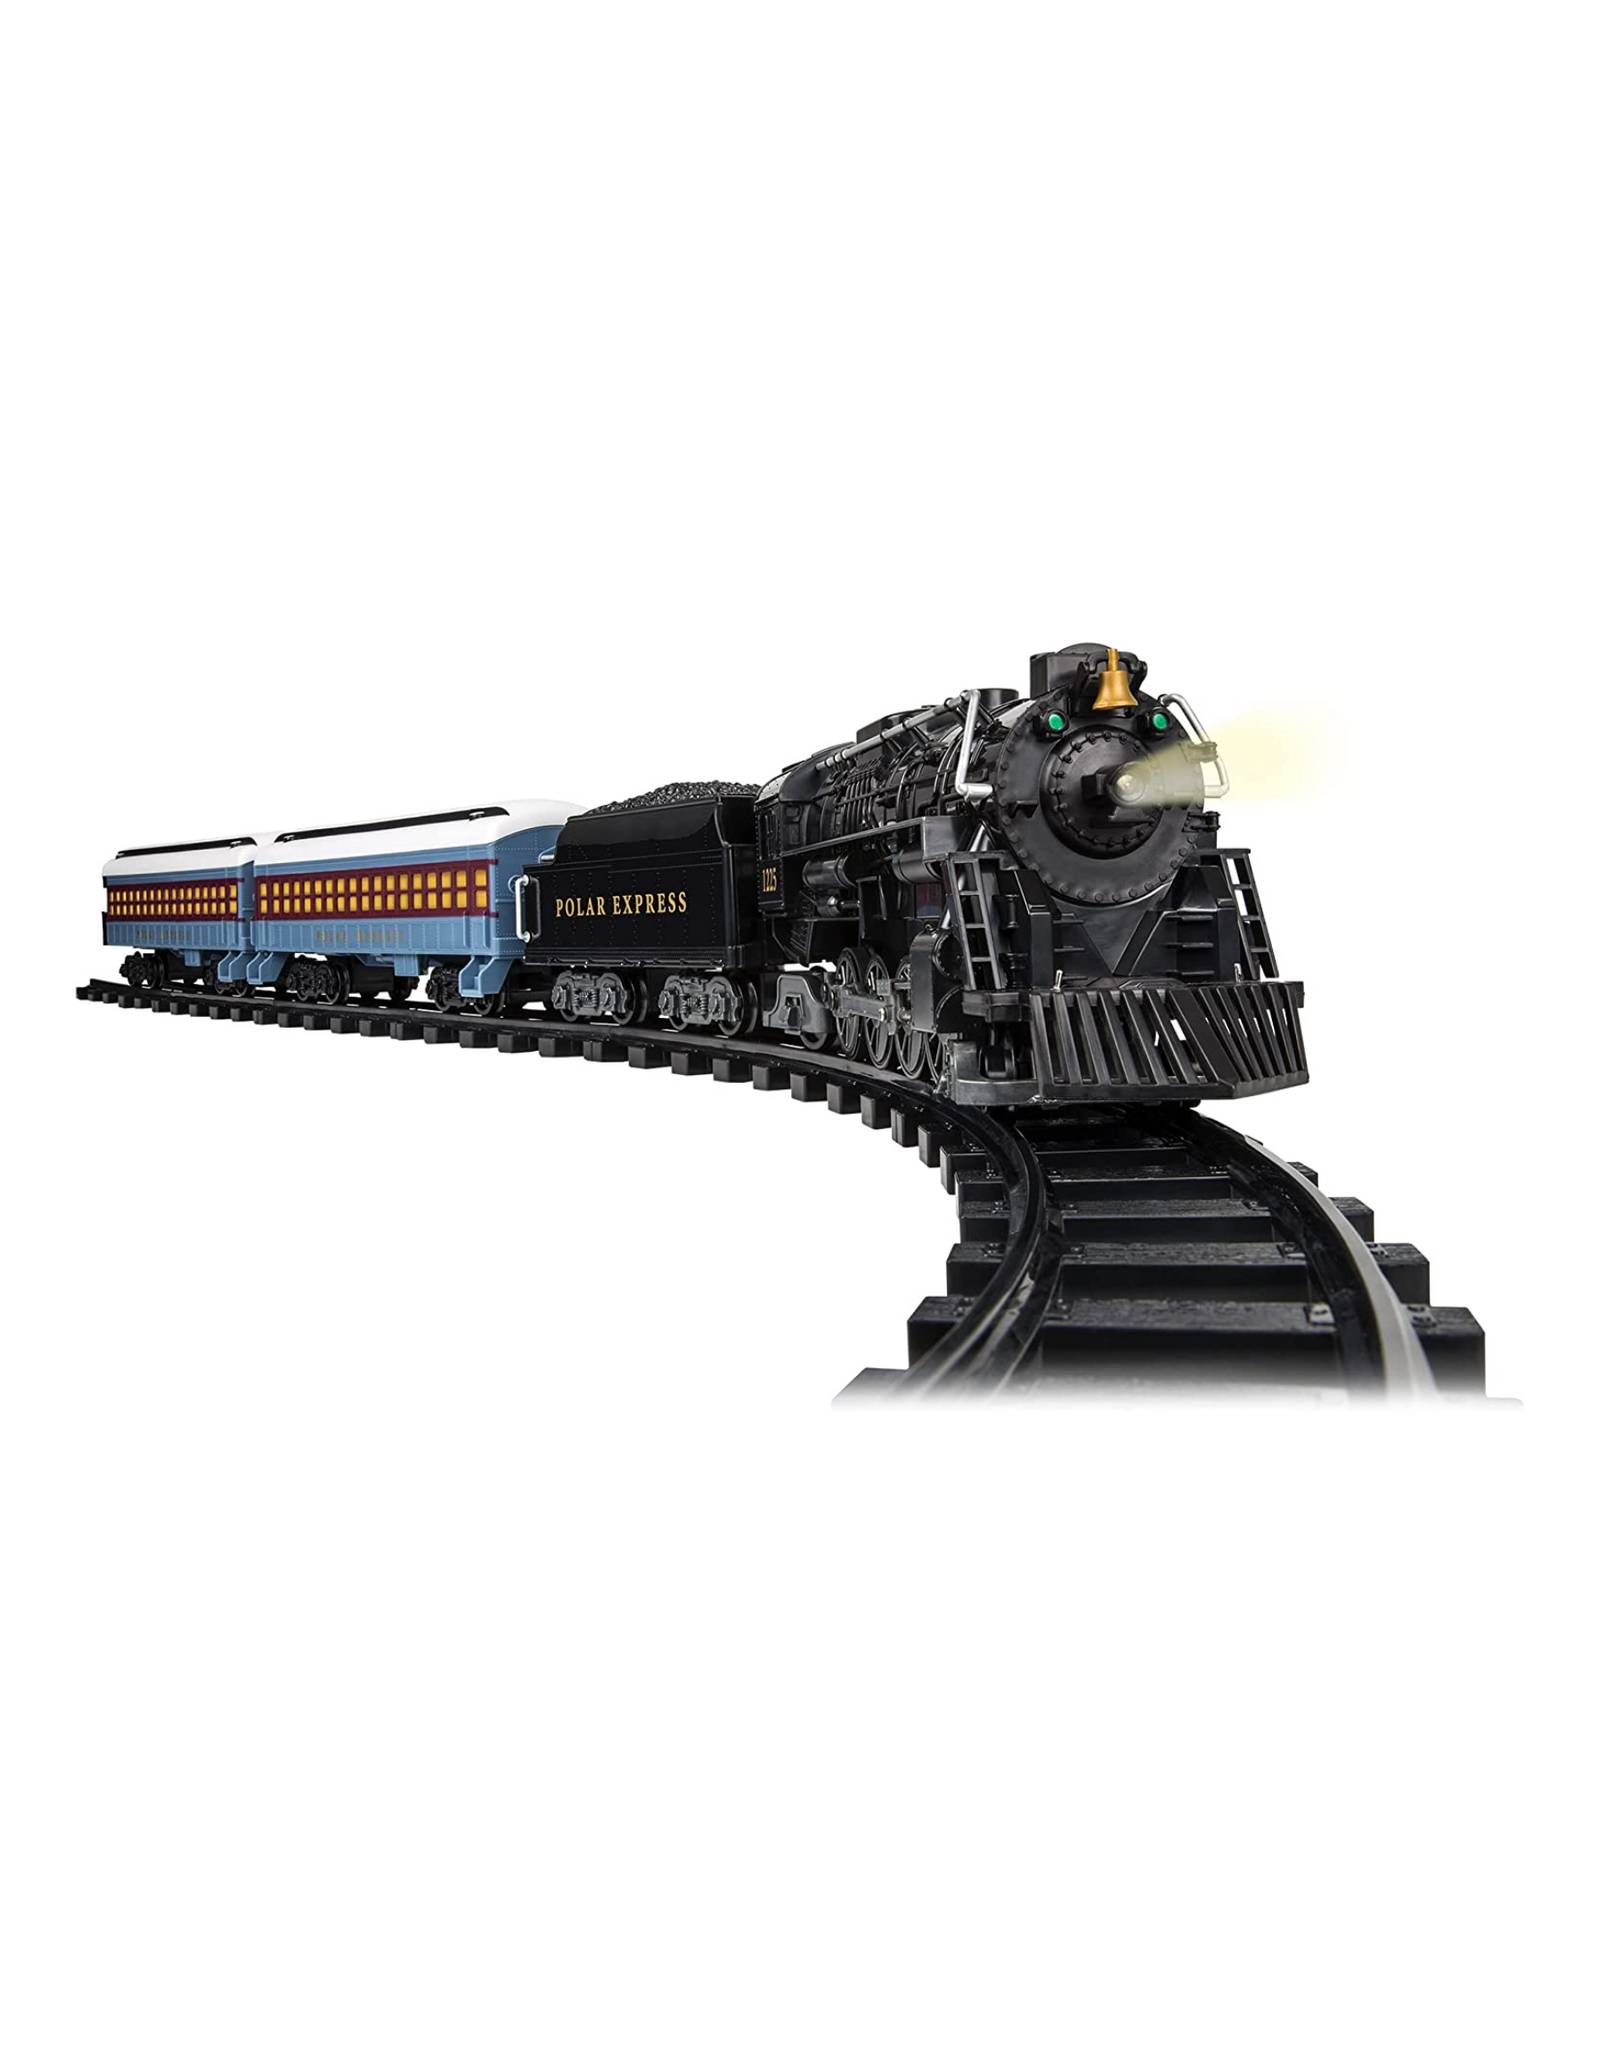 Lionel The Polar Express Ready-to-Play Train Set with Remote, Battery-Powered Berkshire-Style Model